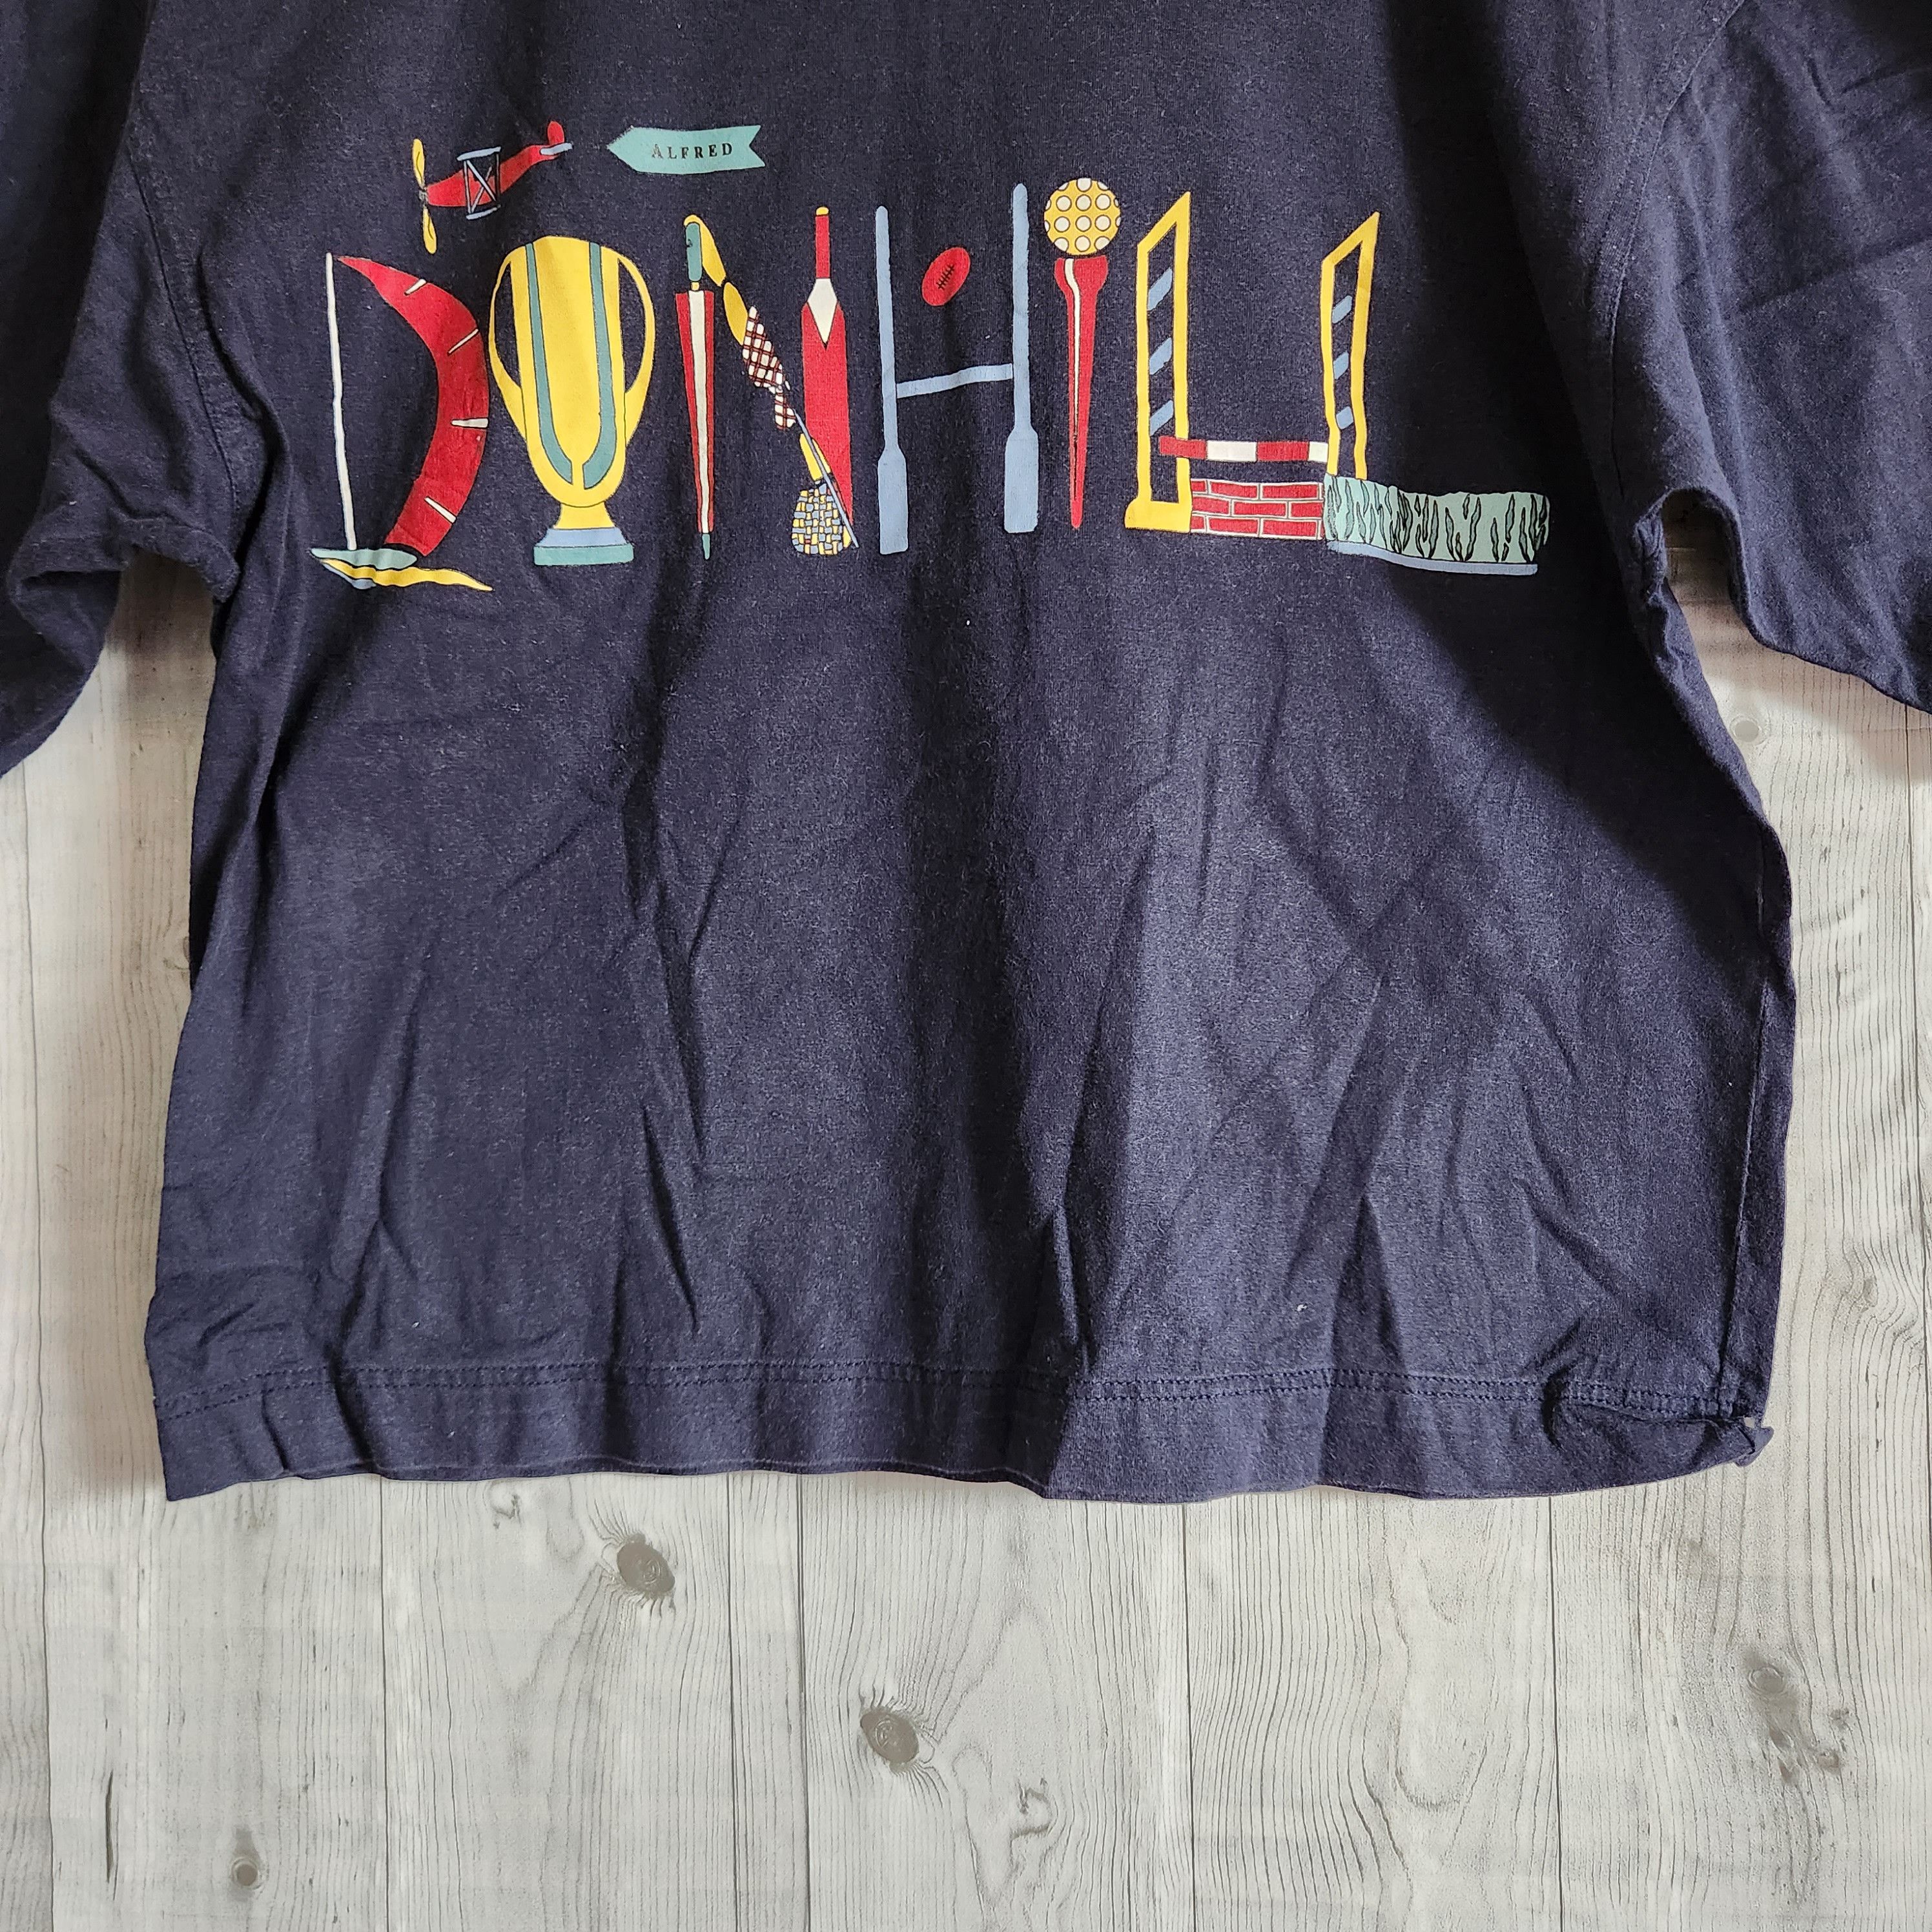 Vintage 1980s Alfred Dunhill TShirt Single Stitches - 5